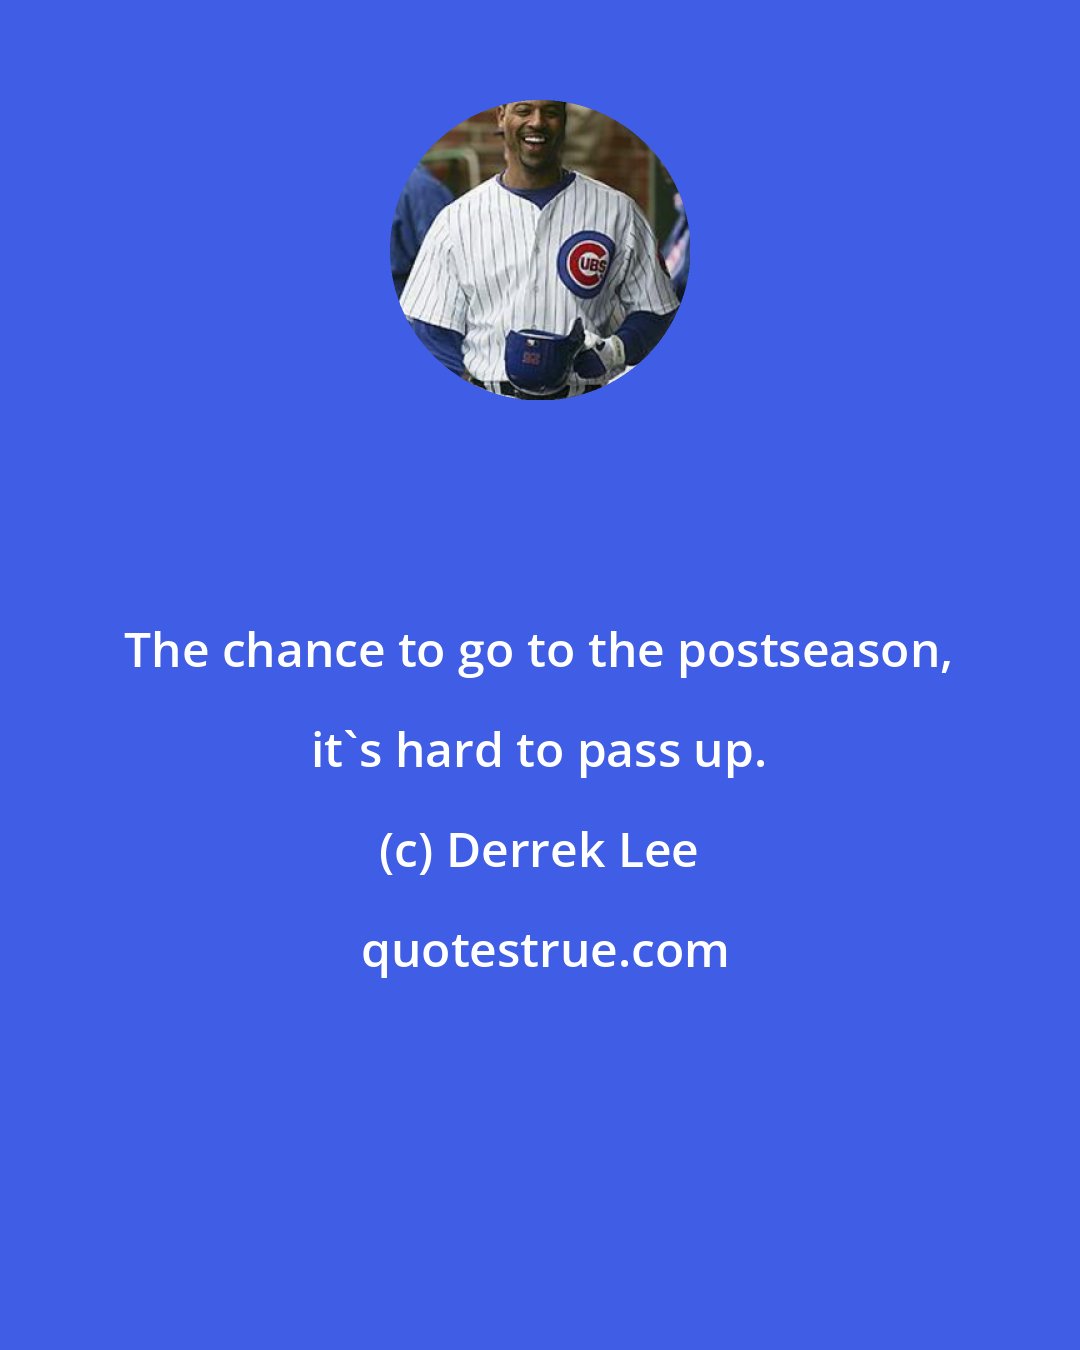 Derrek Lee: The chance to go to the postseason, it's hard to pass up.